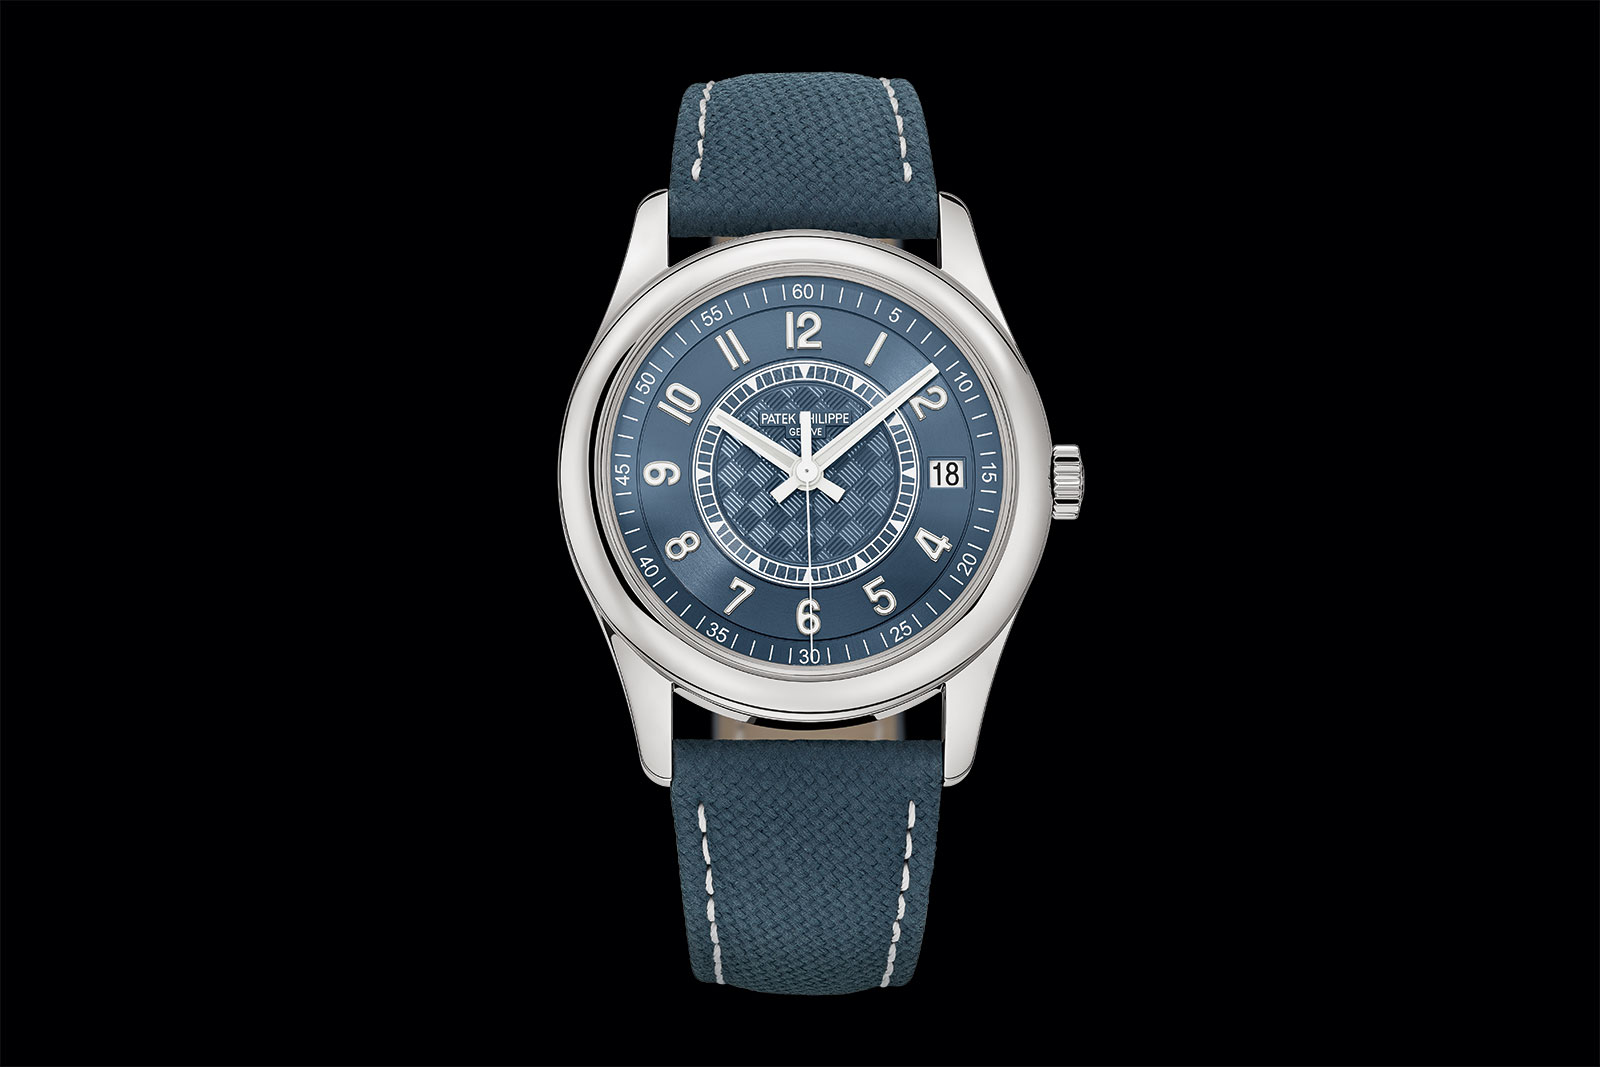 Patek Philippe Introduces The Calatrava Ref 6007a 001 For The New Manufacture Sjx Watches